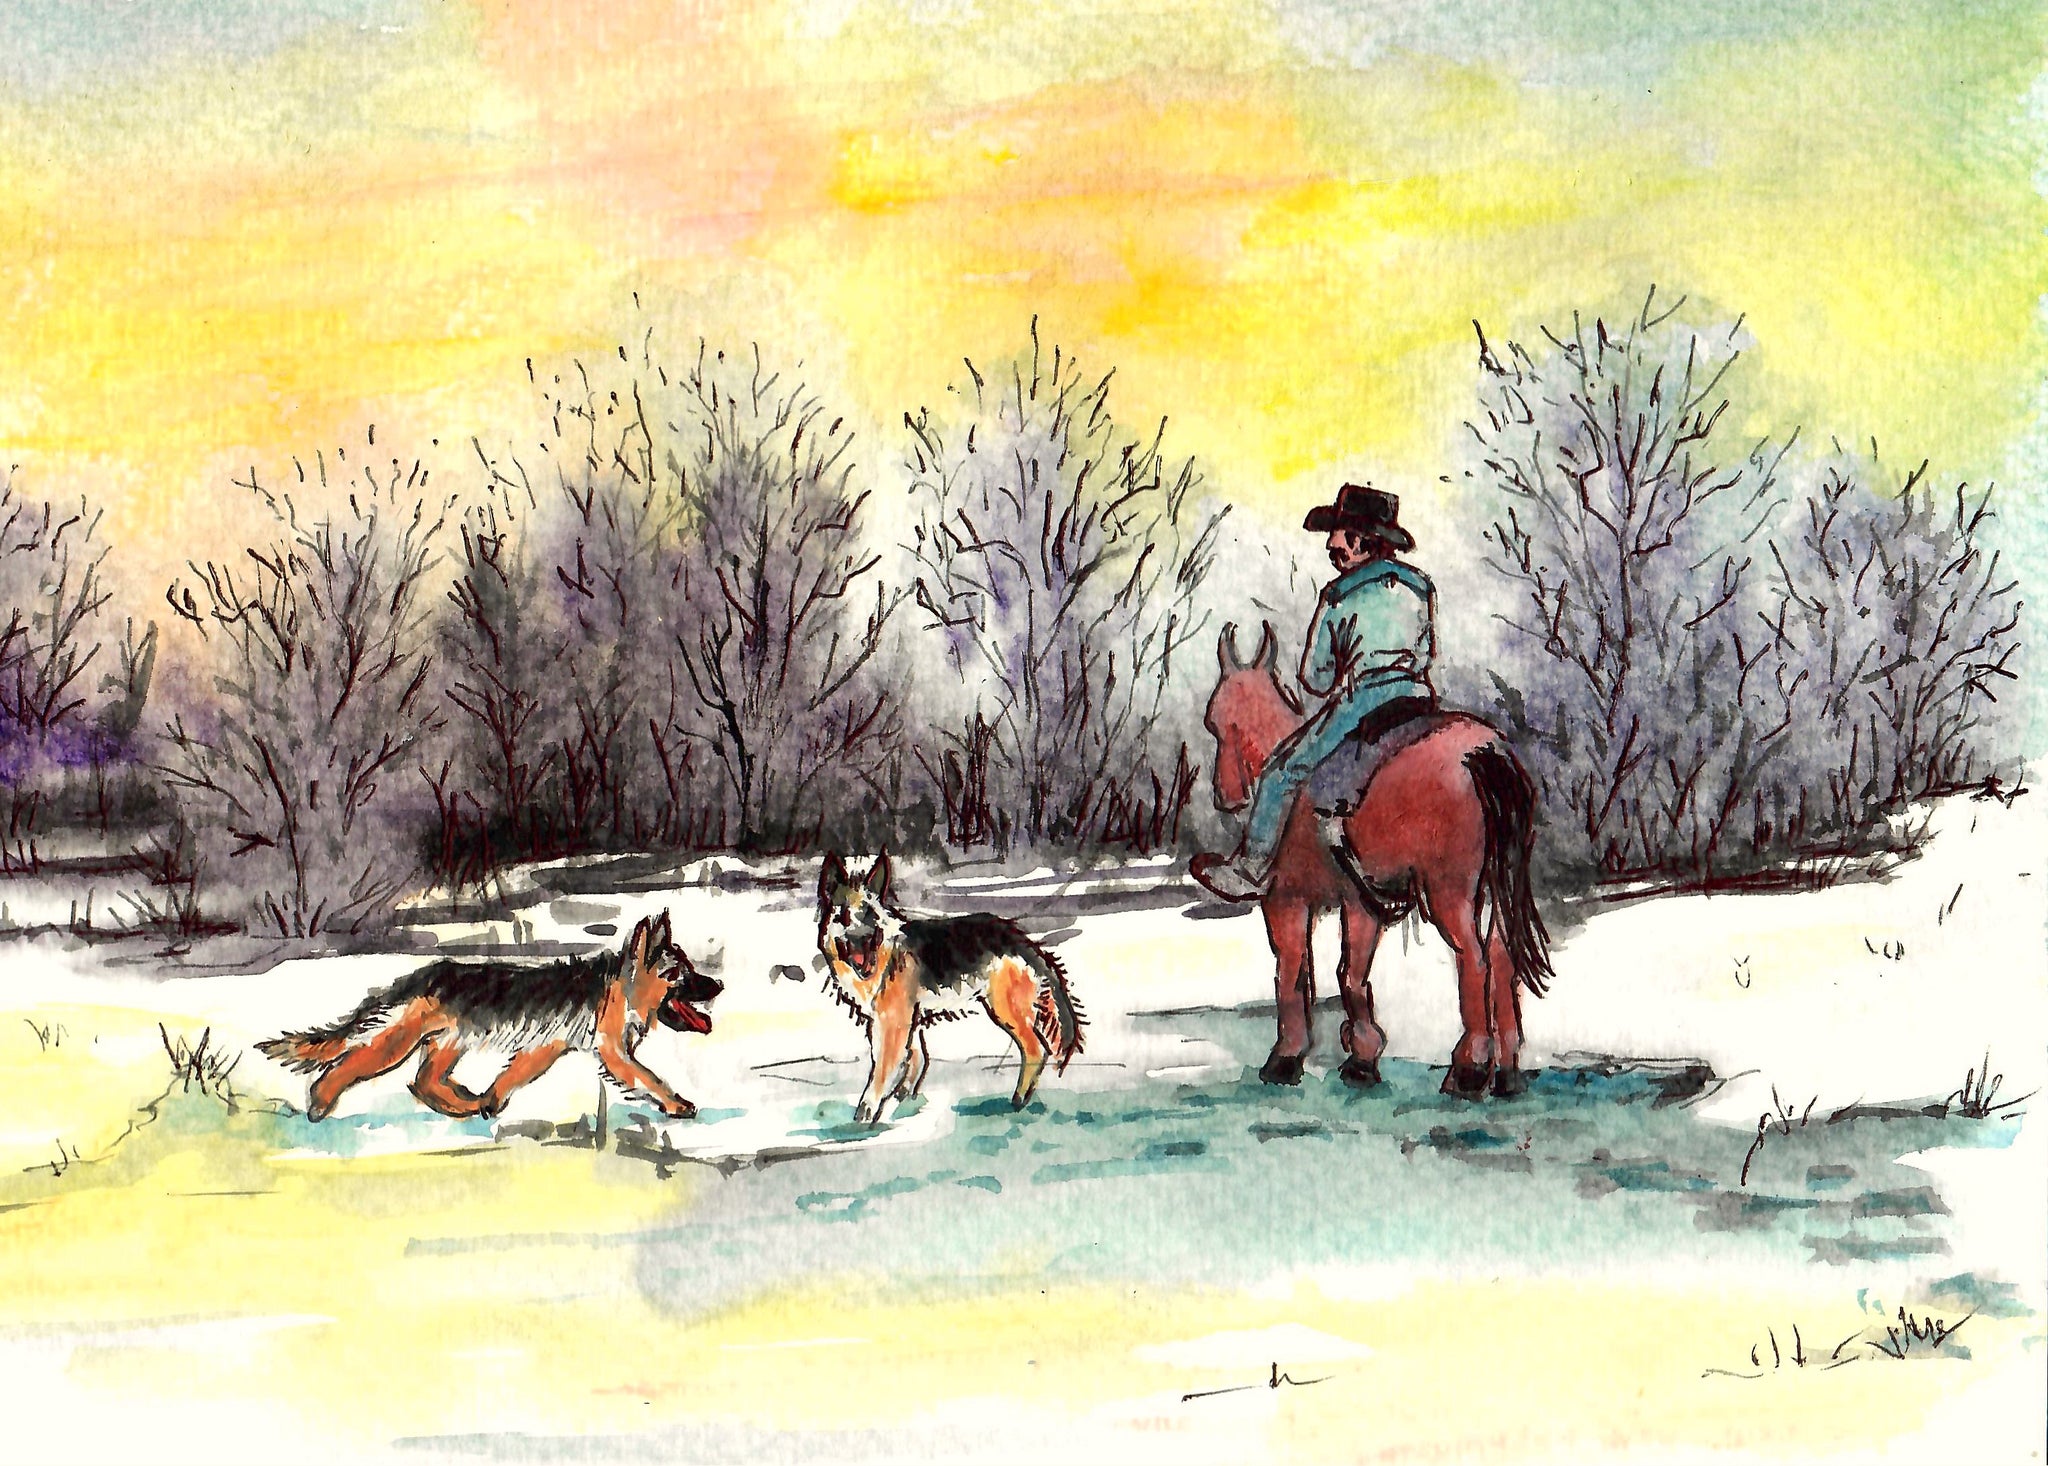 Western - Cowboy On Horse With His Dogs In Winter, Cowboy Art, Cowboy Winter Scene